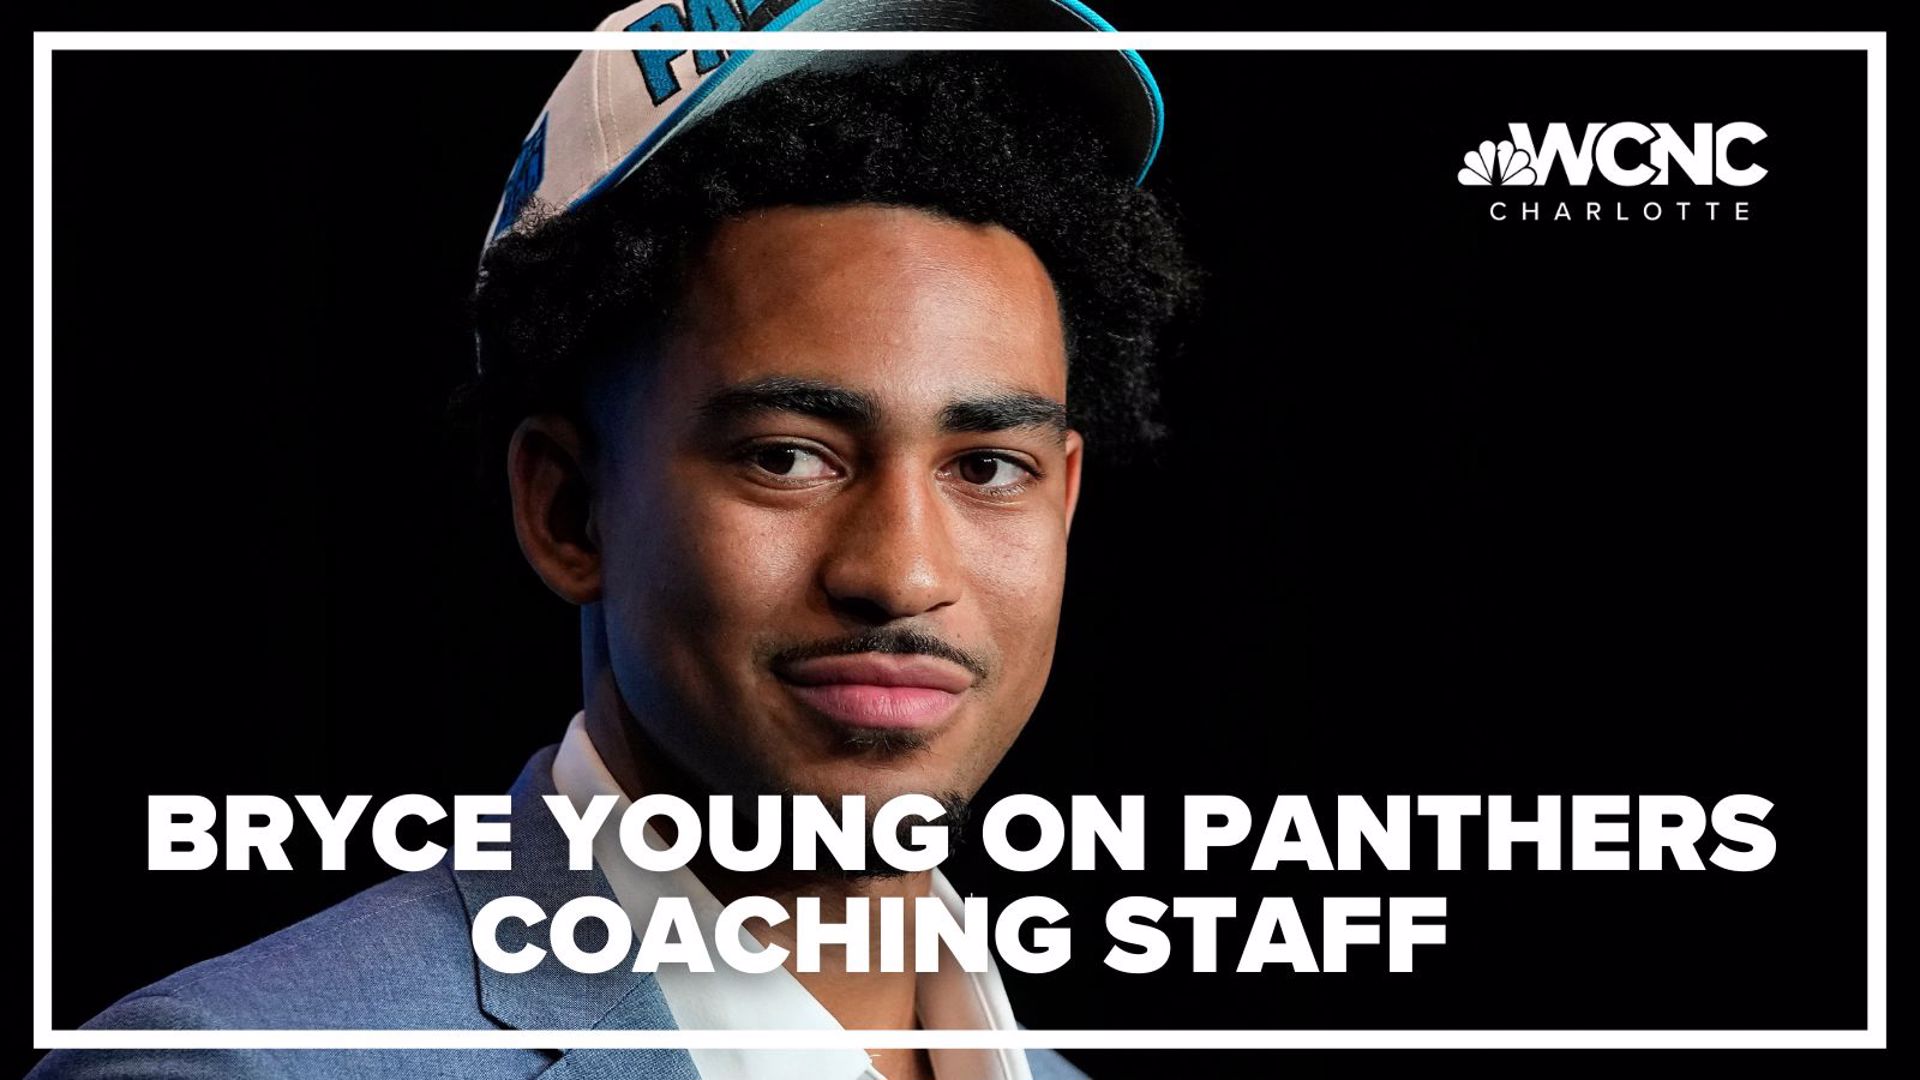 Bryce Young, the first overall pick in the 2023 NFL Draft, describes playing for a coaching staff comprised of former NFL players, including Frank Reich.